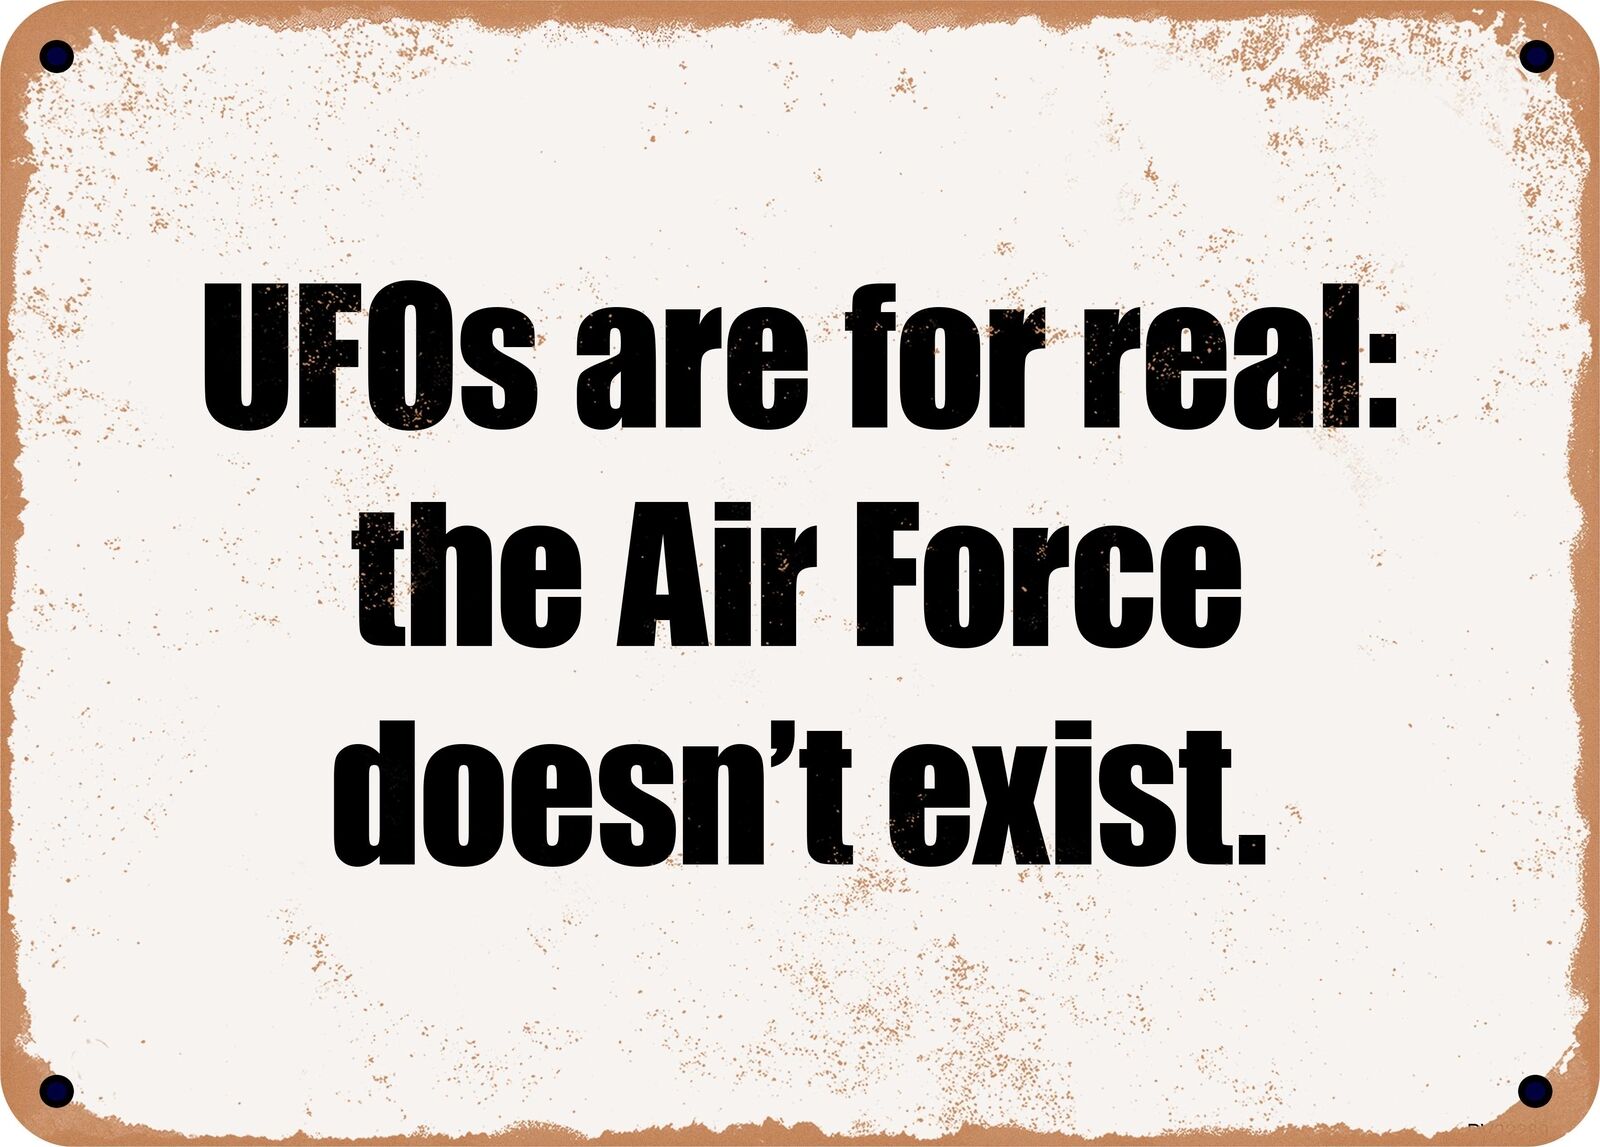 METAL SIGN - UFOs are for real: the Air Force doesn't exist.